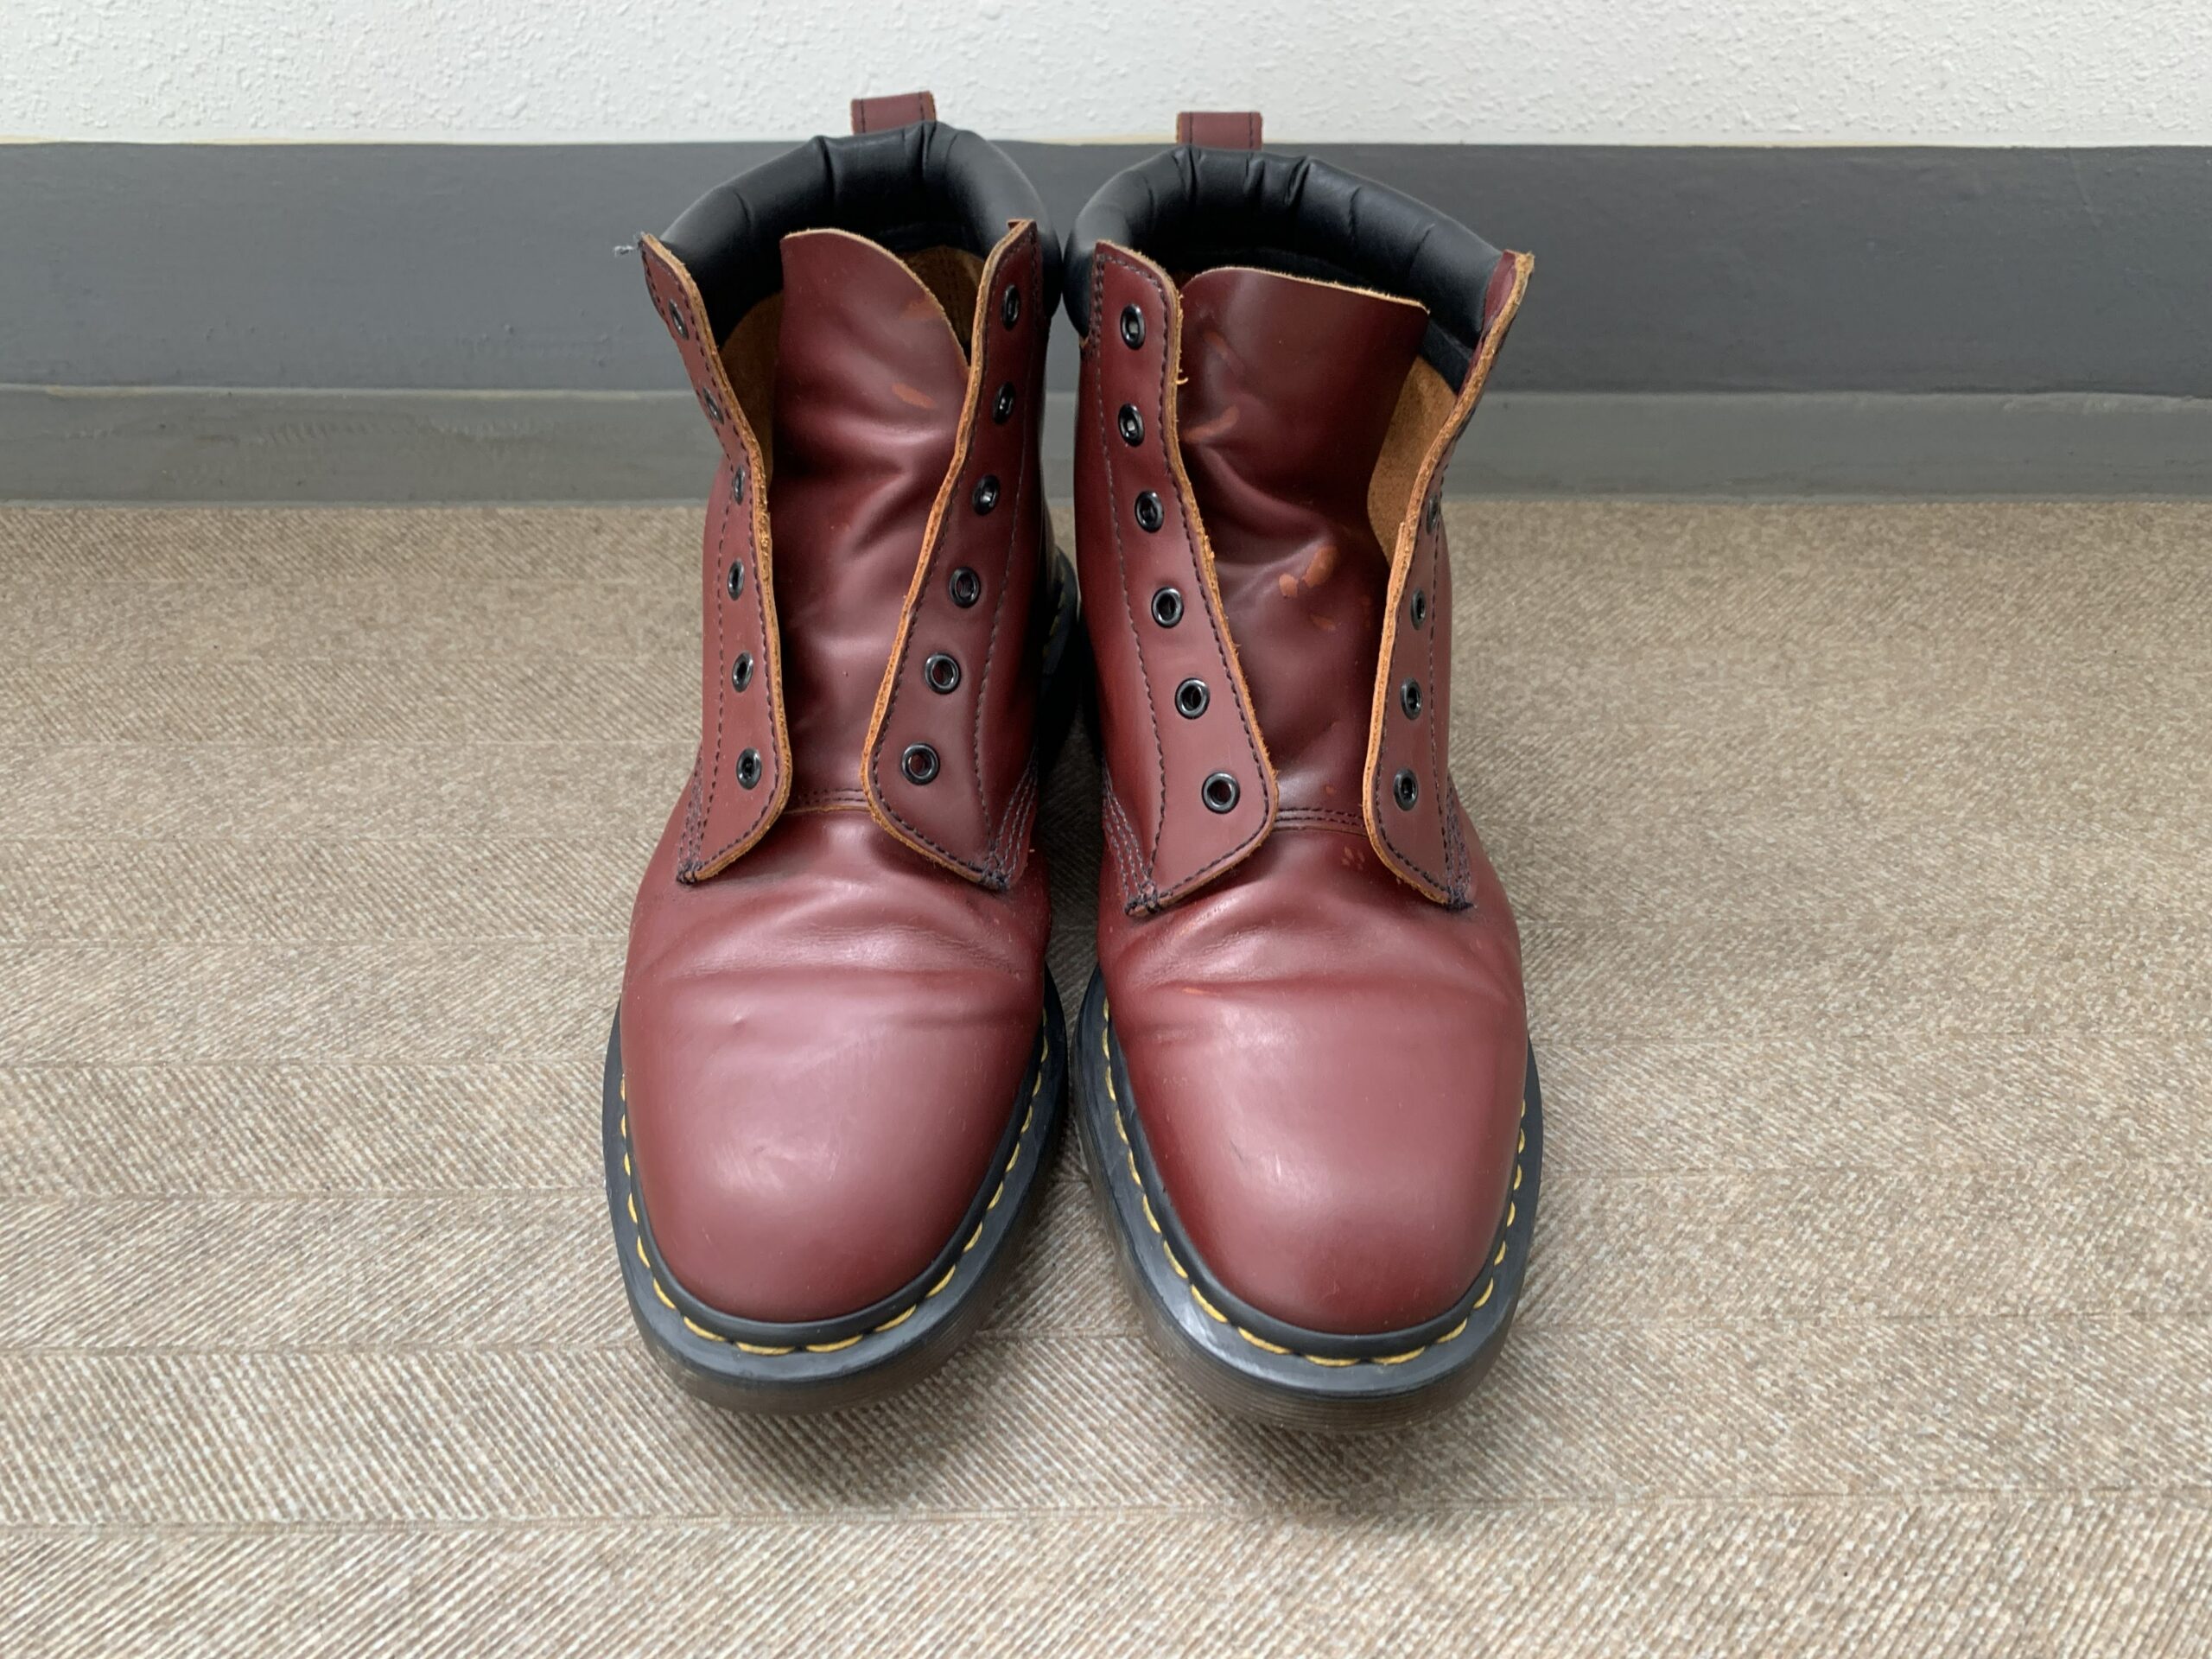 How to Dye Dr Martens Black - Kwa